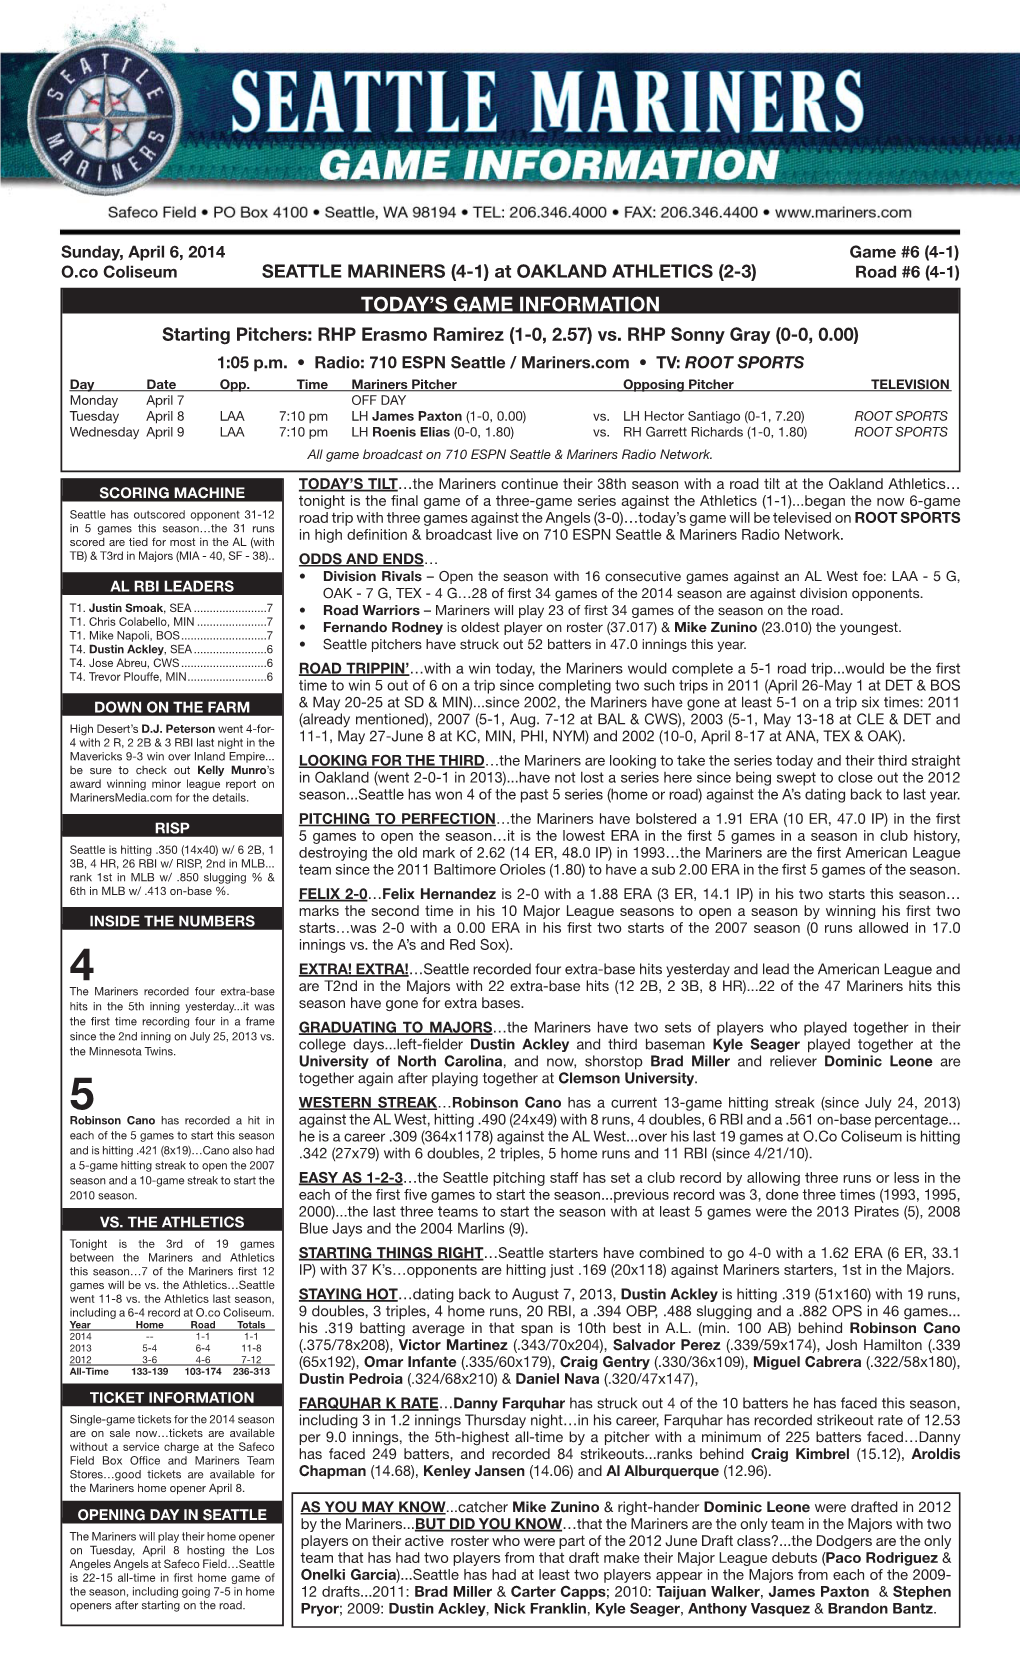 04-06-2014 Mariners Game Notes